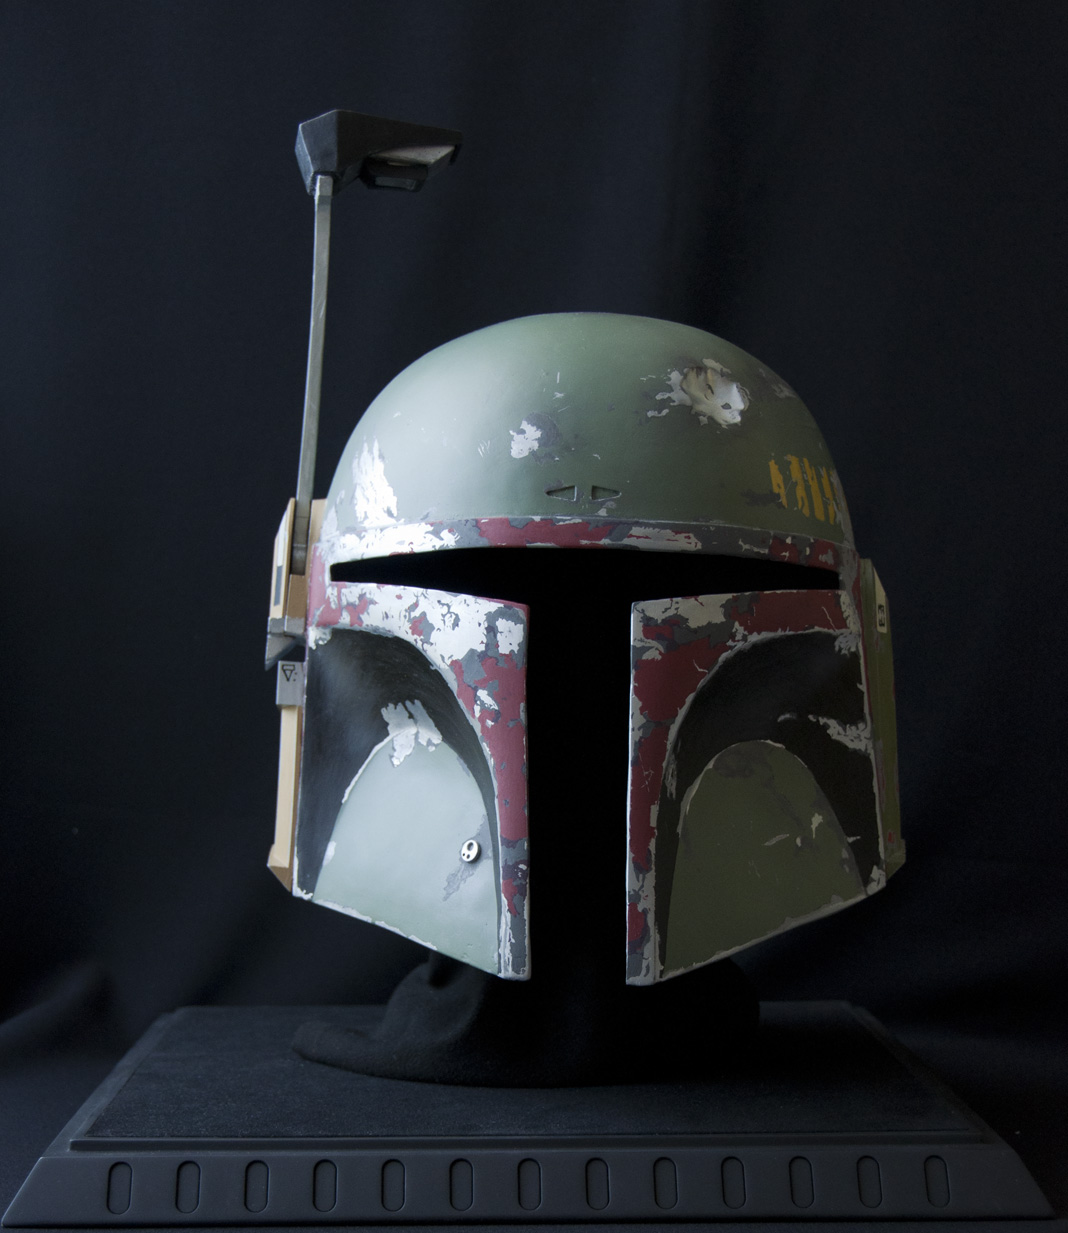 TRPN helmet (front view)
Painted by me